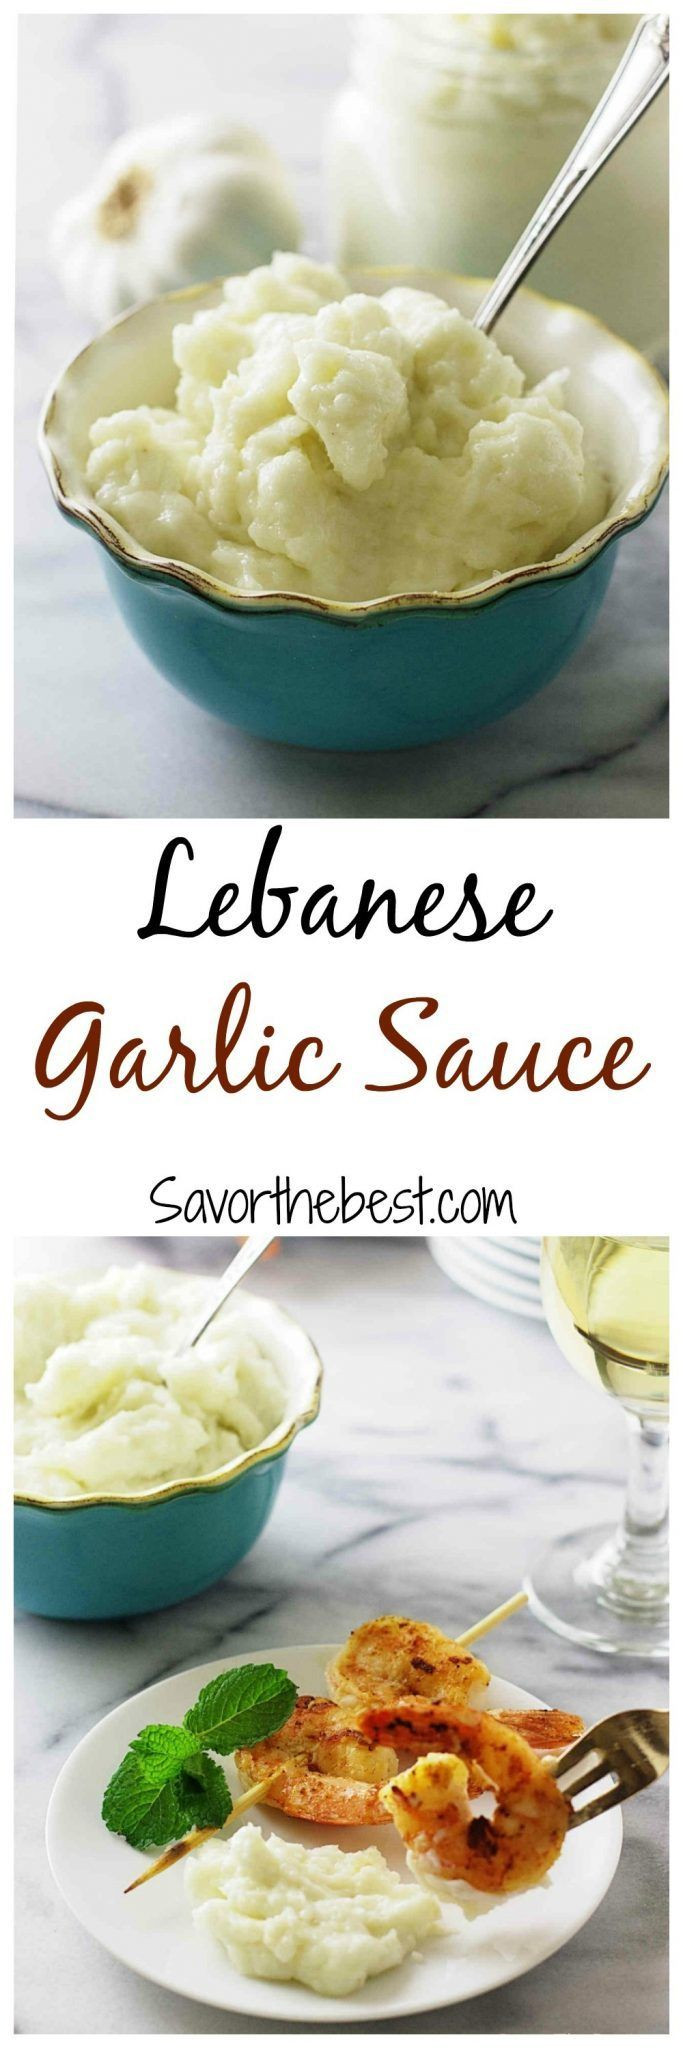 Middle Eastern Garlic Sauce Recipes
 334 best Middle Eastern Food images on Pinterest